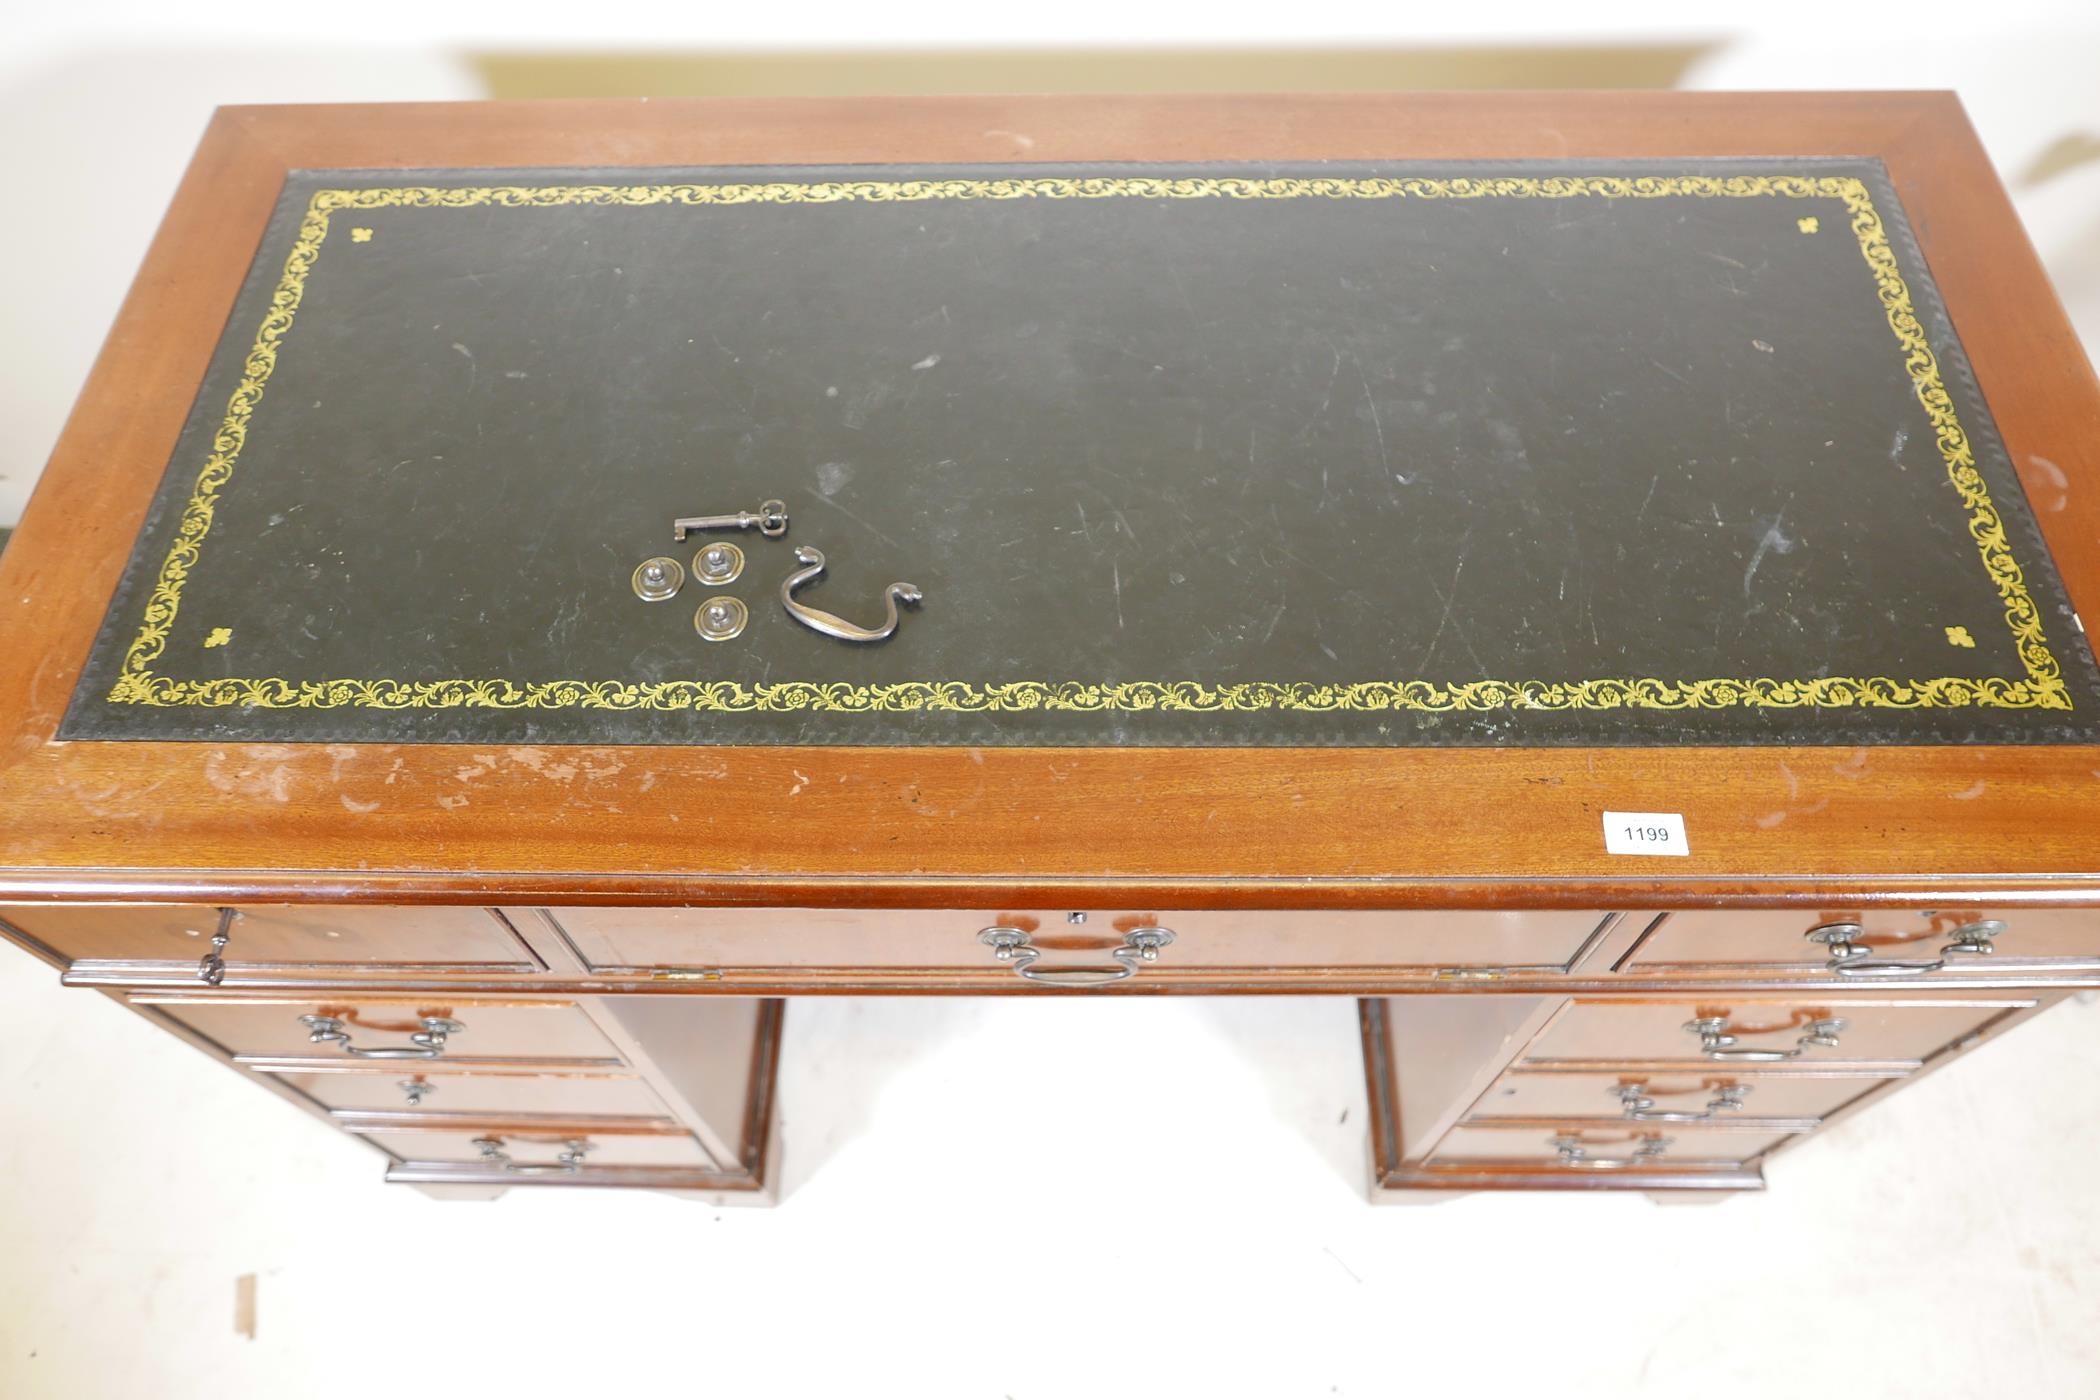 A mahogany pedestal desk with a tooled inset top, hidden keyboard drawer/slide, drawers and a - Image 4 of 6